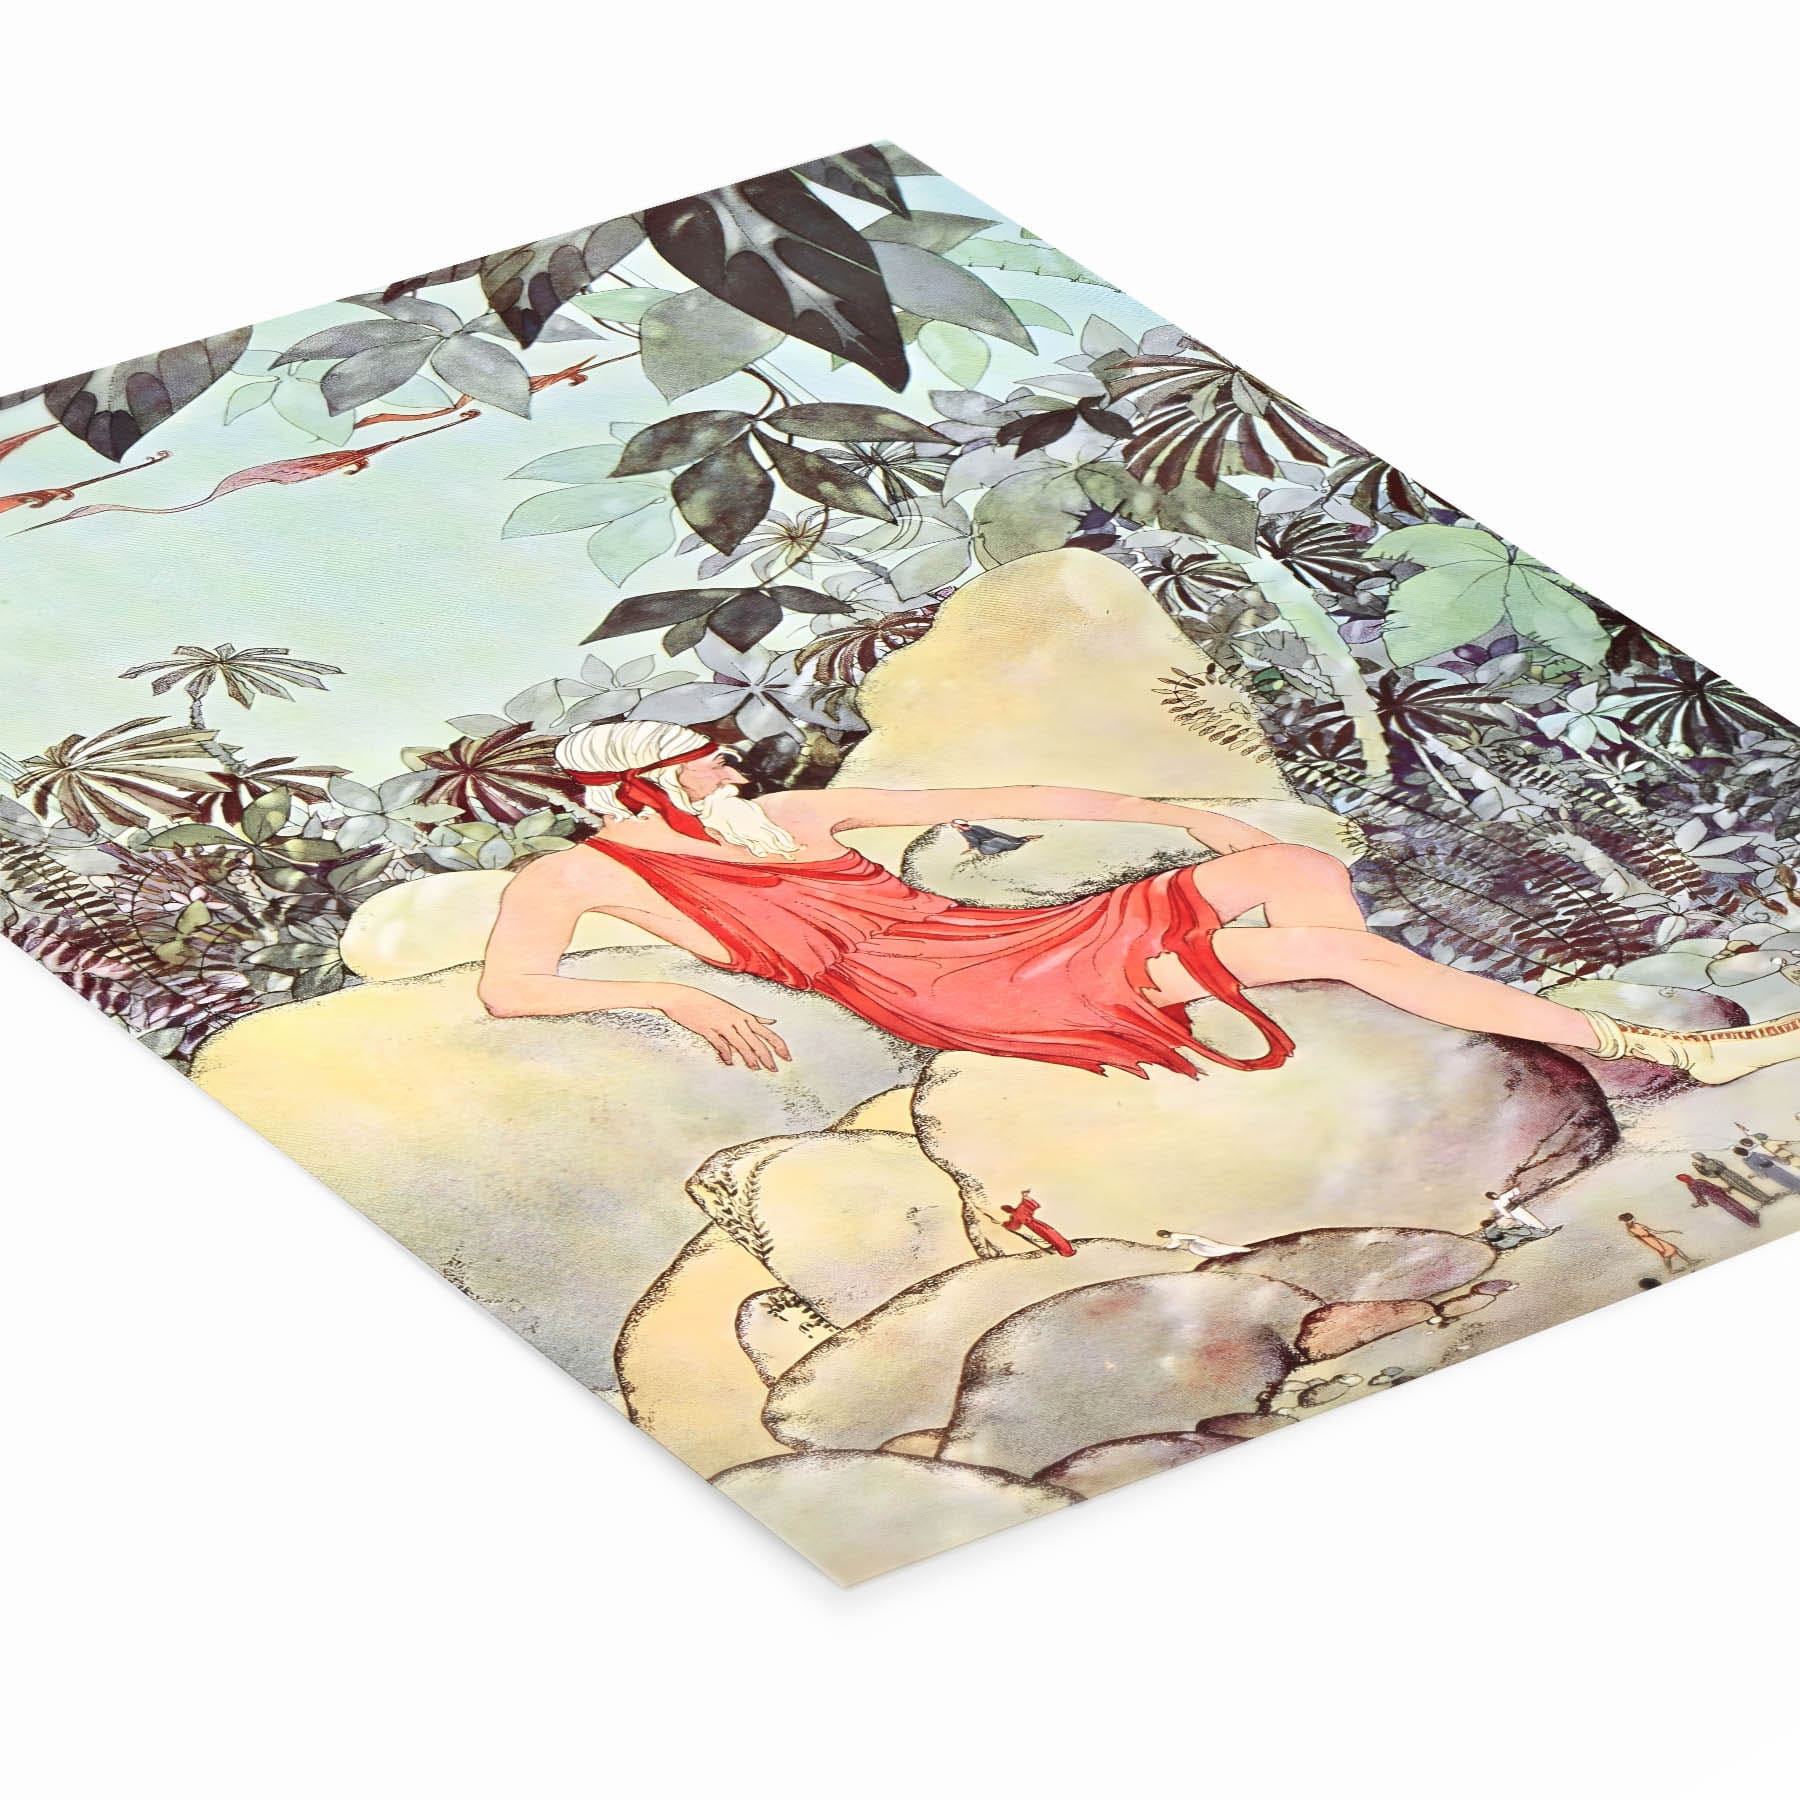 Fairy Tale Giant Art Print Laying Flat on a White Background